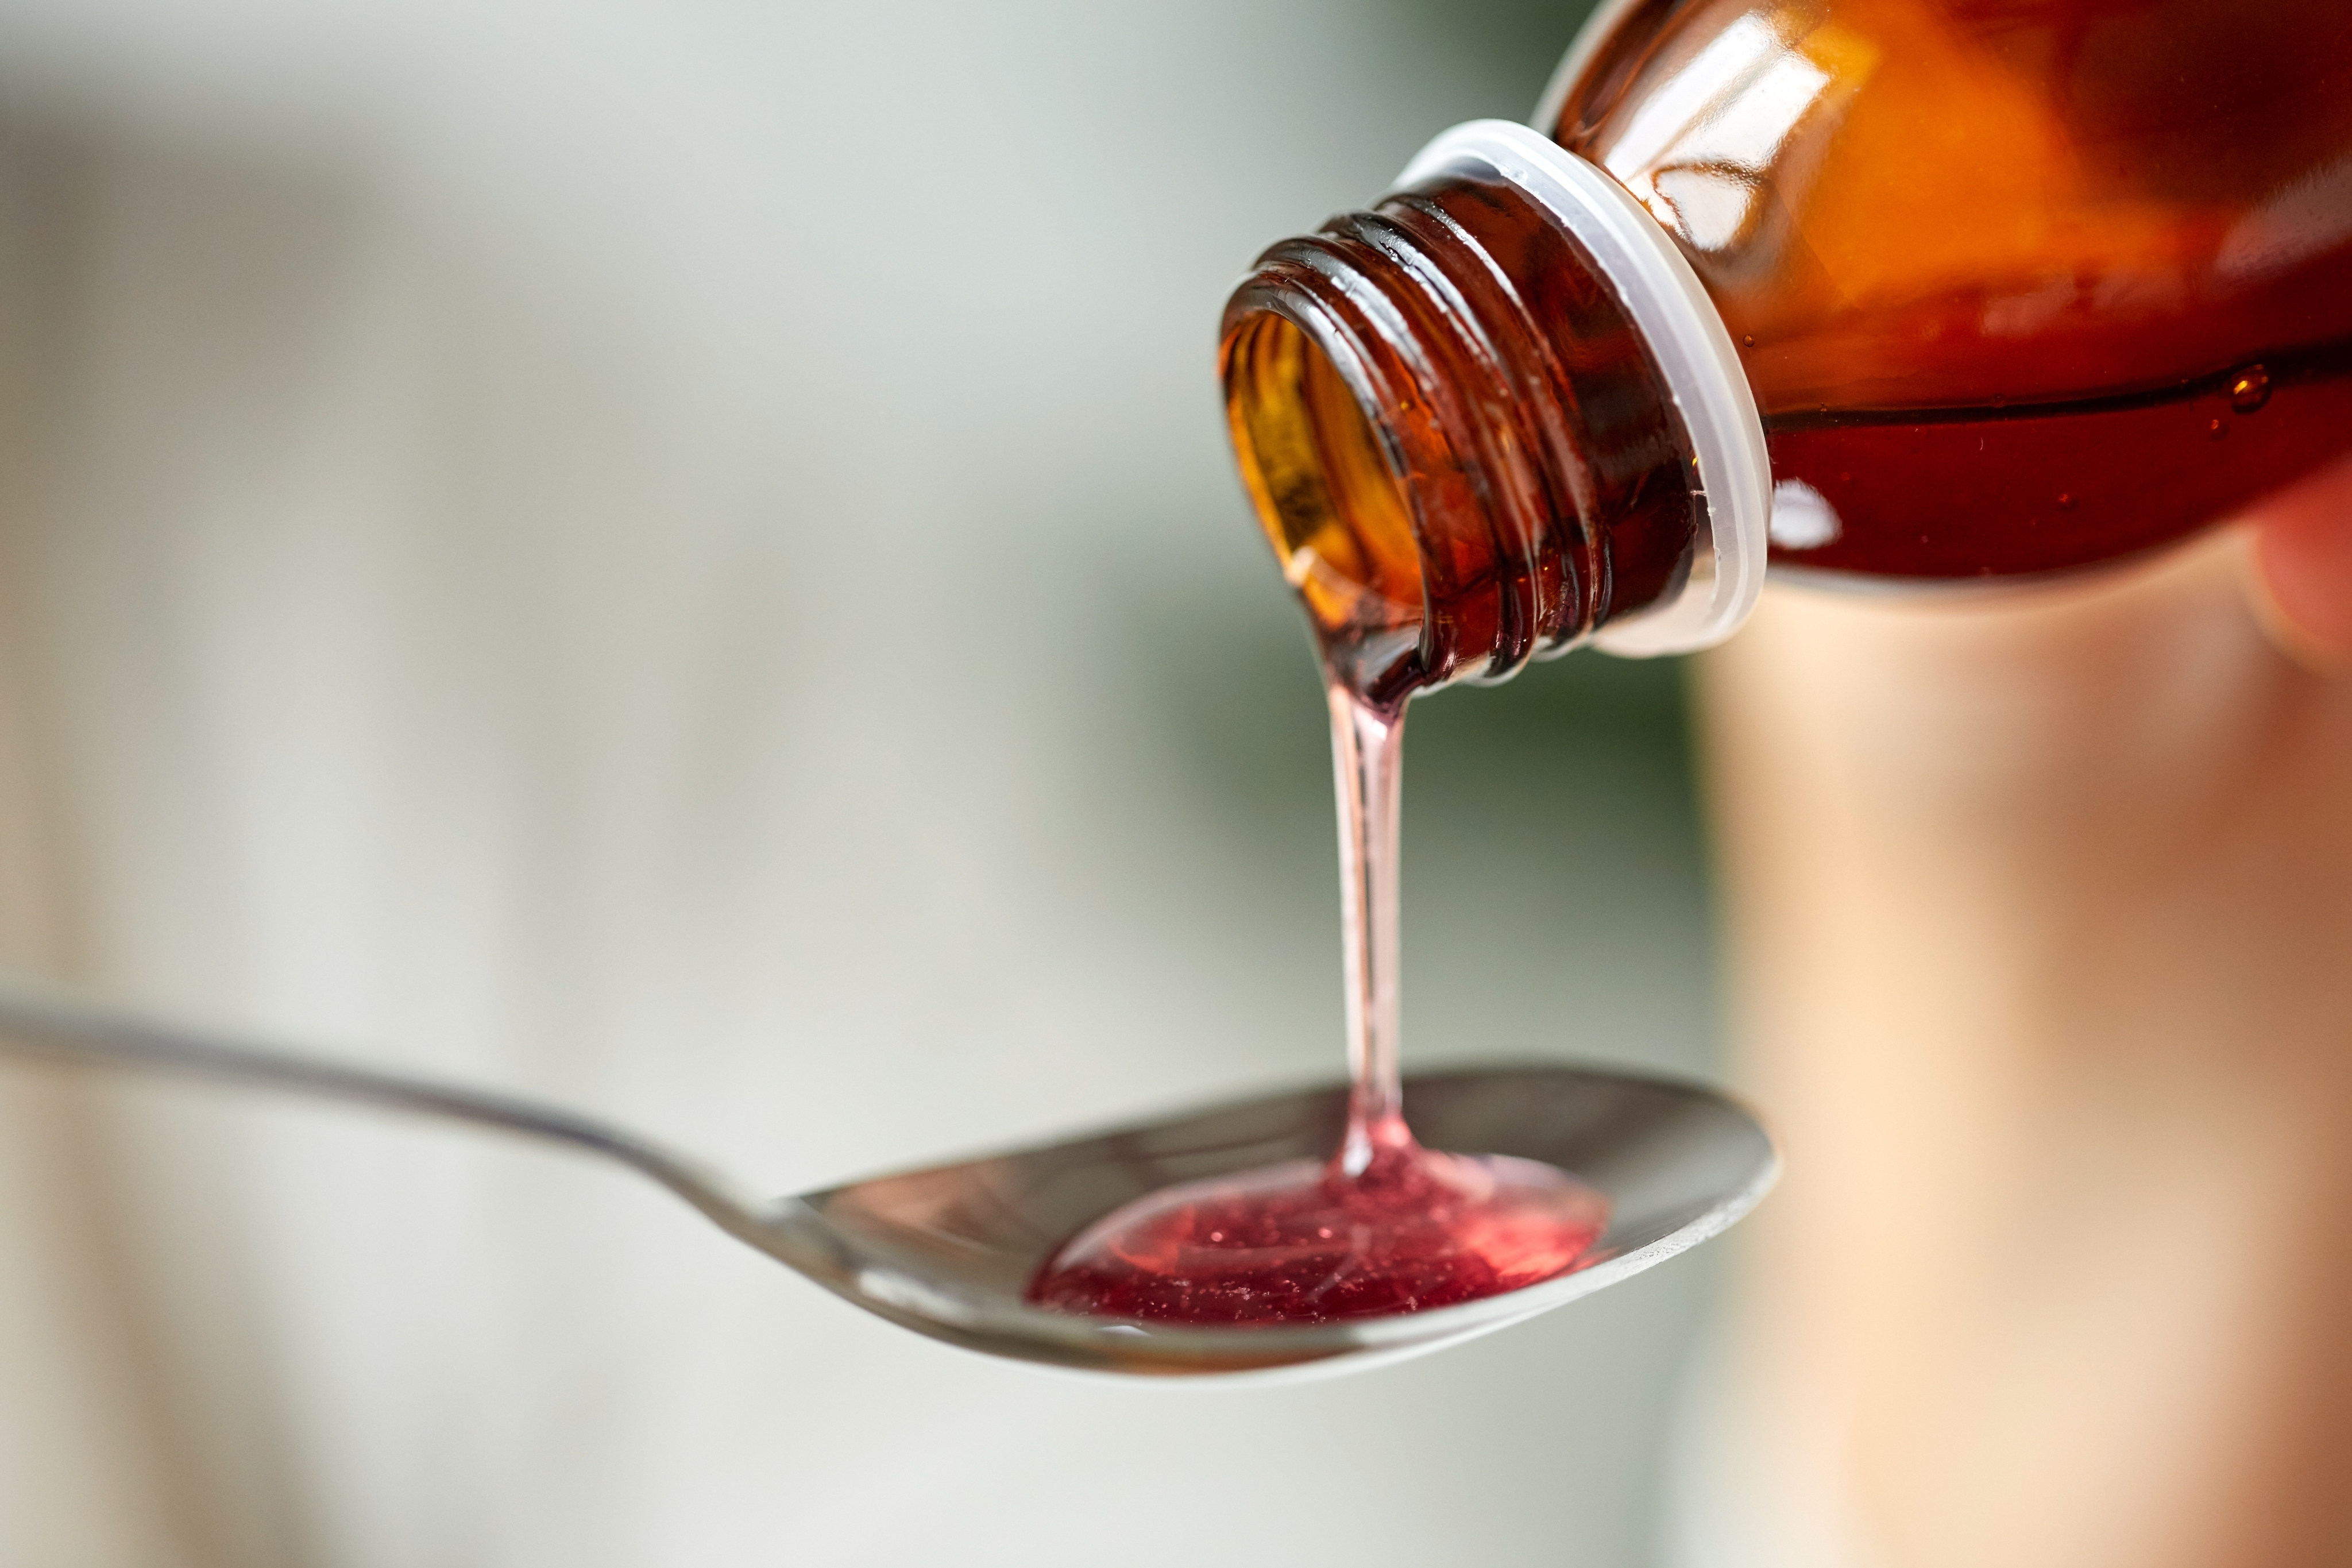 India has made testing mandatory for cough syrup exports after the deaths of dozens of children overseas. Photo: Shutterstock